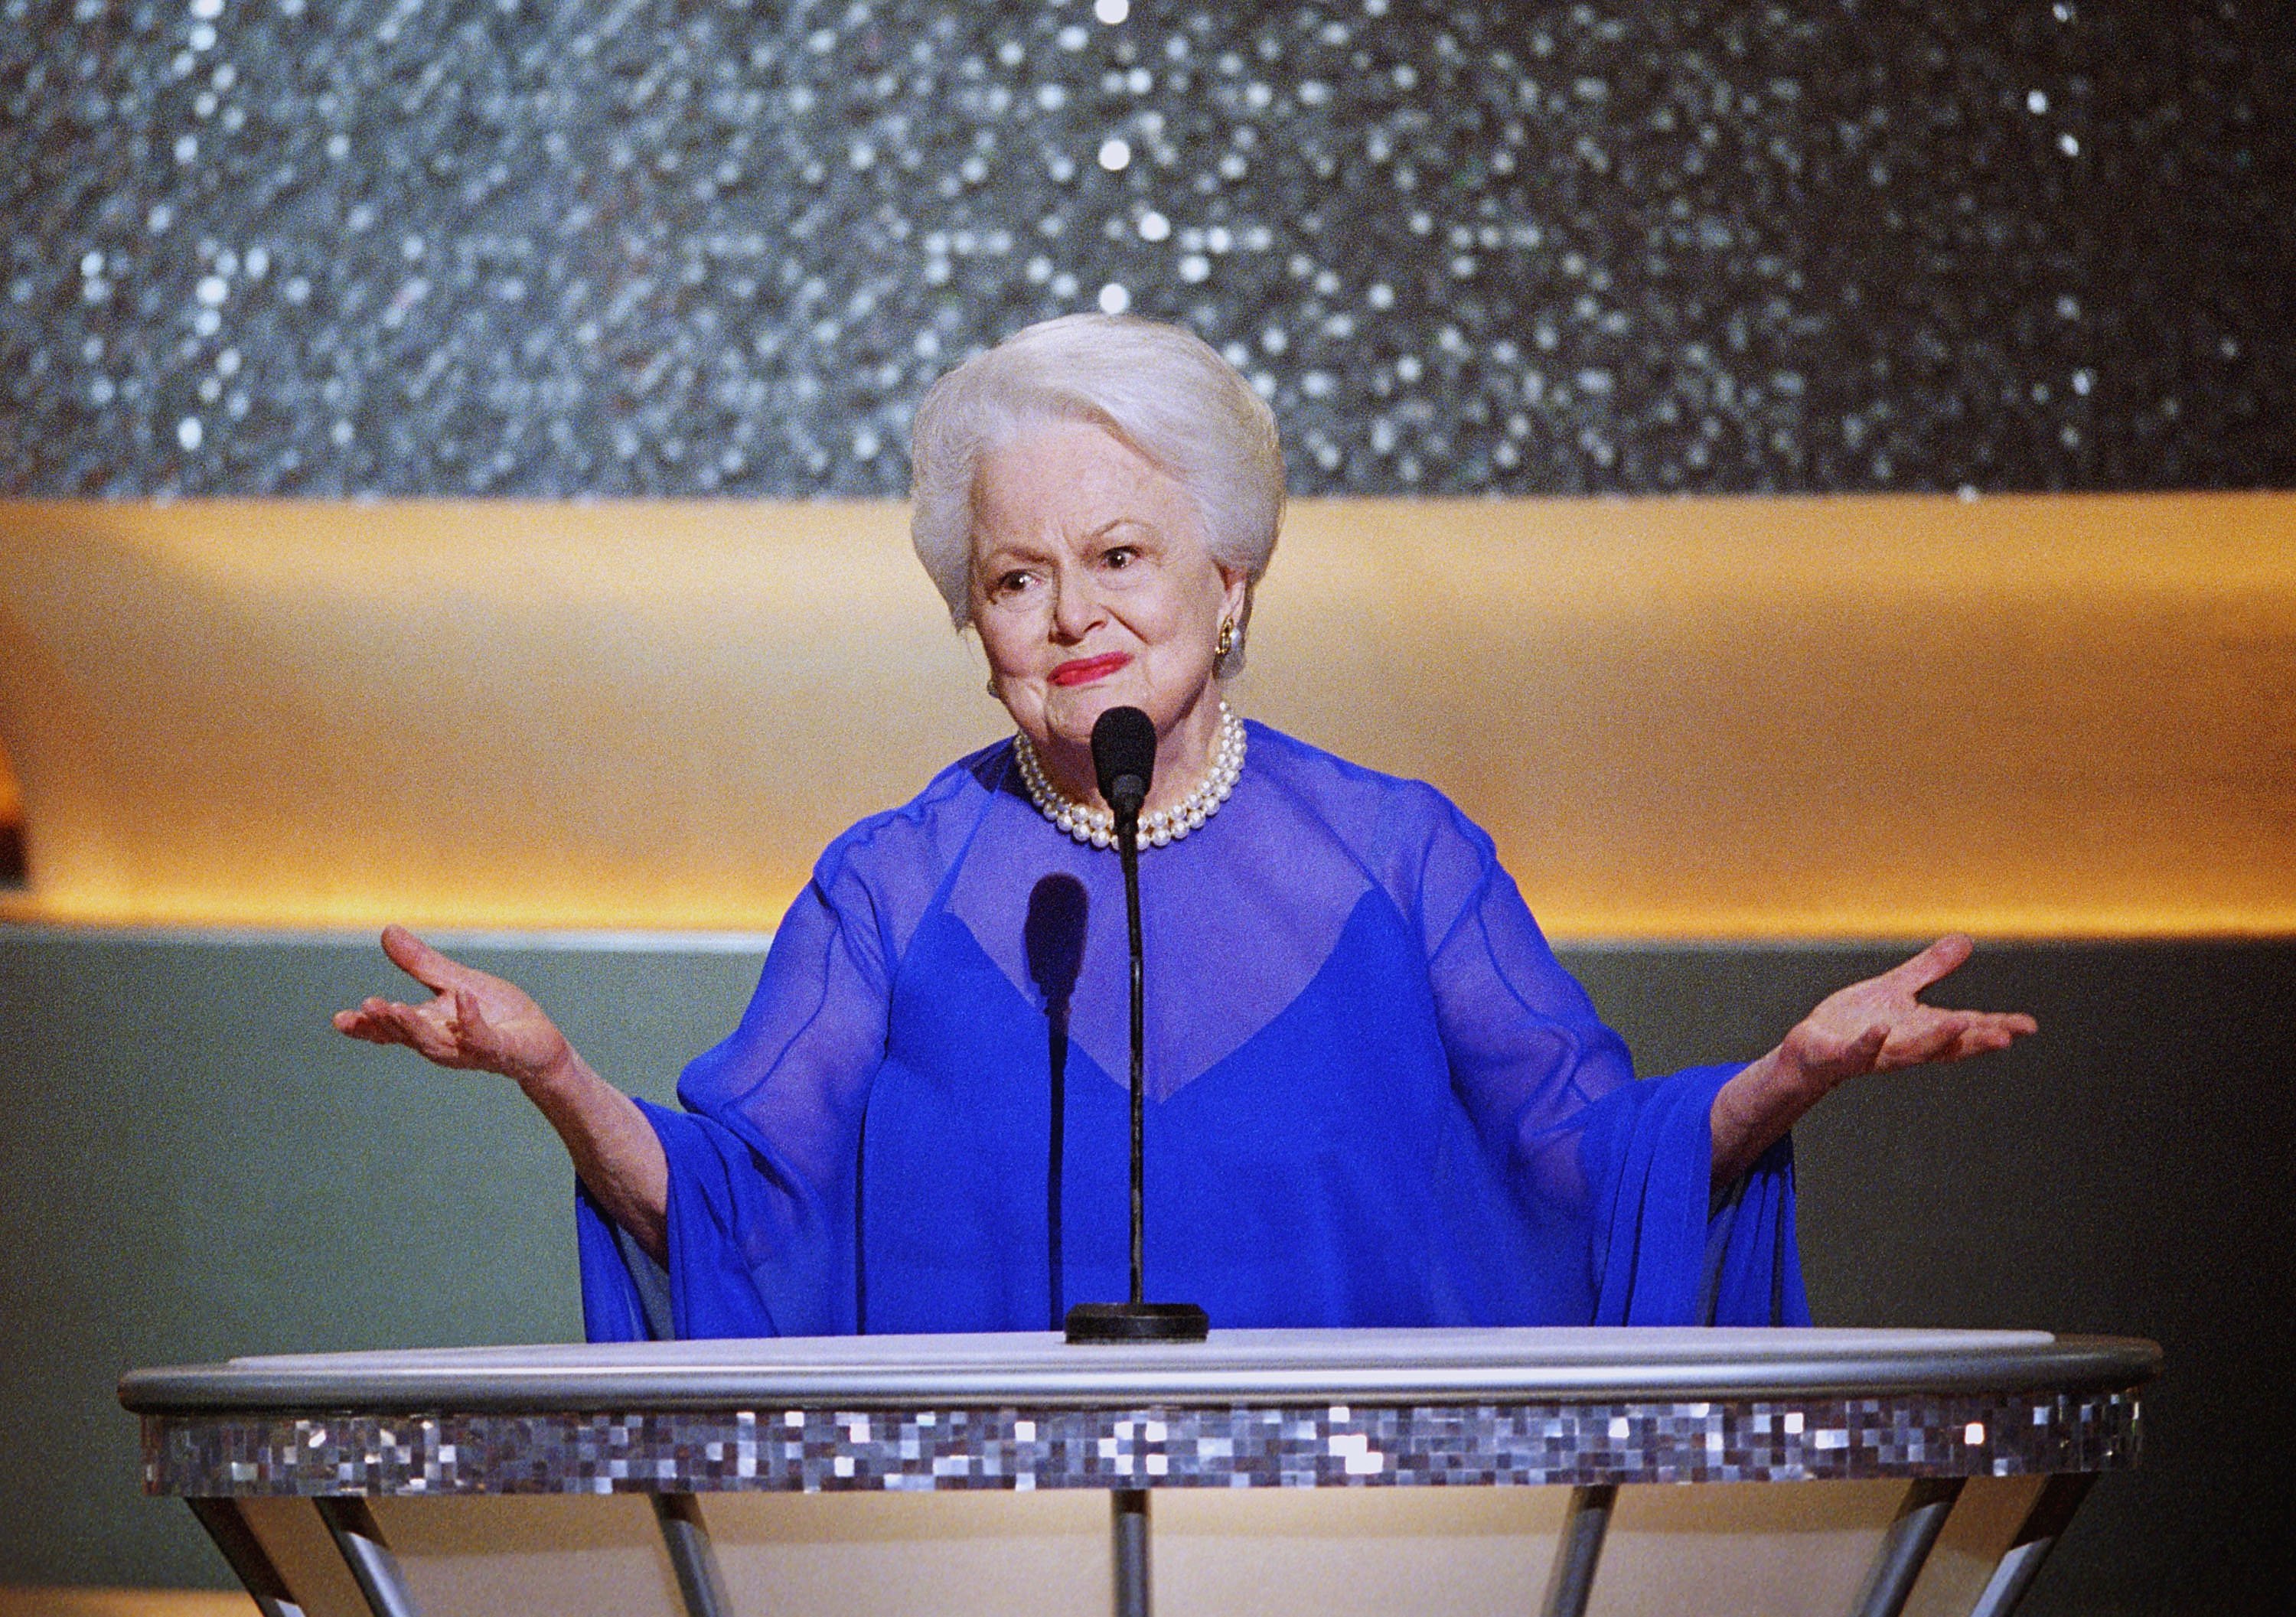  Former Best Actress Oscar winner Olivia de Havilland (To Each His Own, 1946) introduces other former winners in acting categories for a group presentation during the 75th Annual Academy Awards at the Kodak Theater on March 23, 2003 in Hollywood, California. | Source: Getty Images